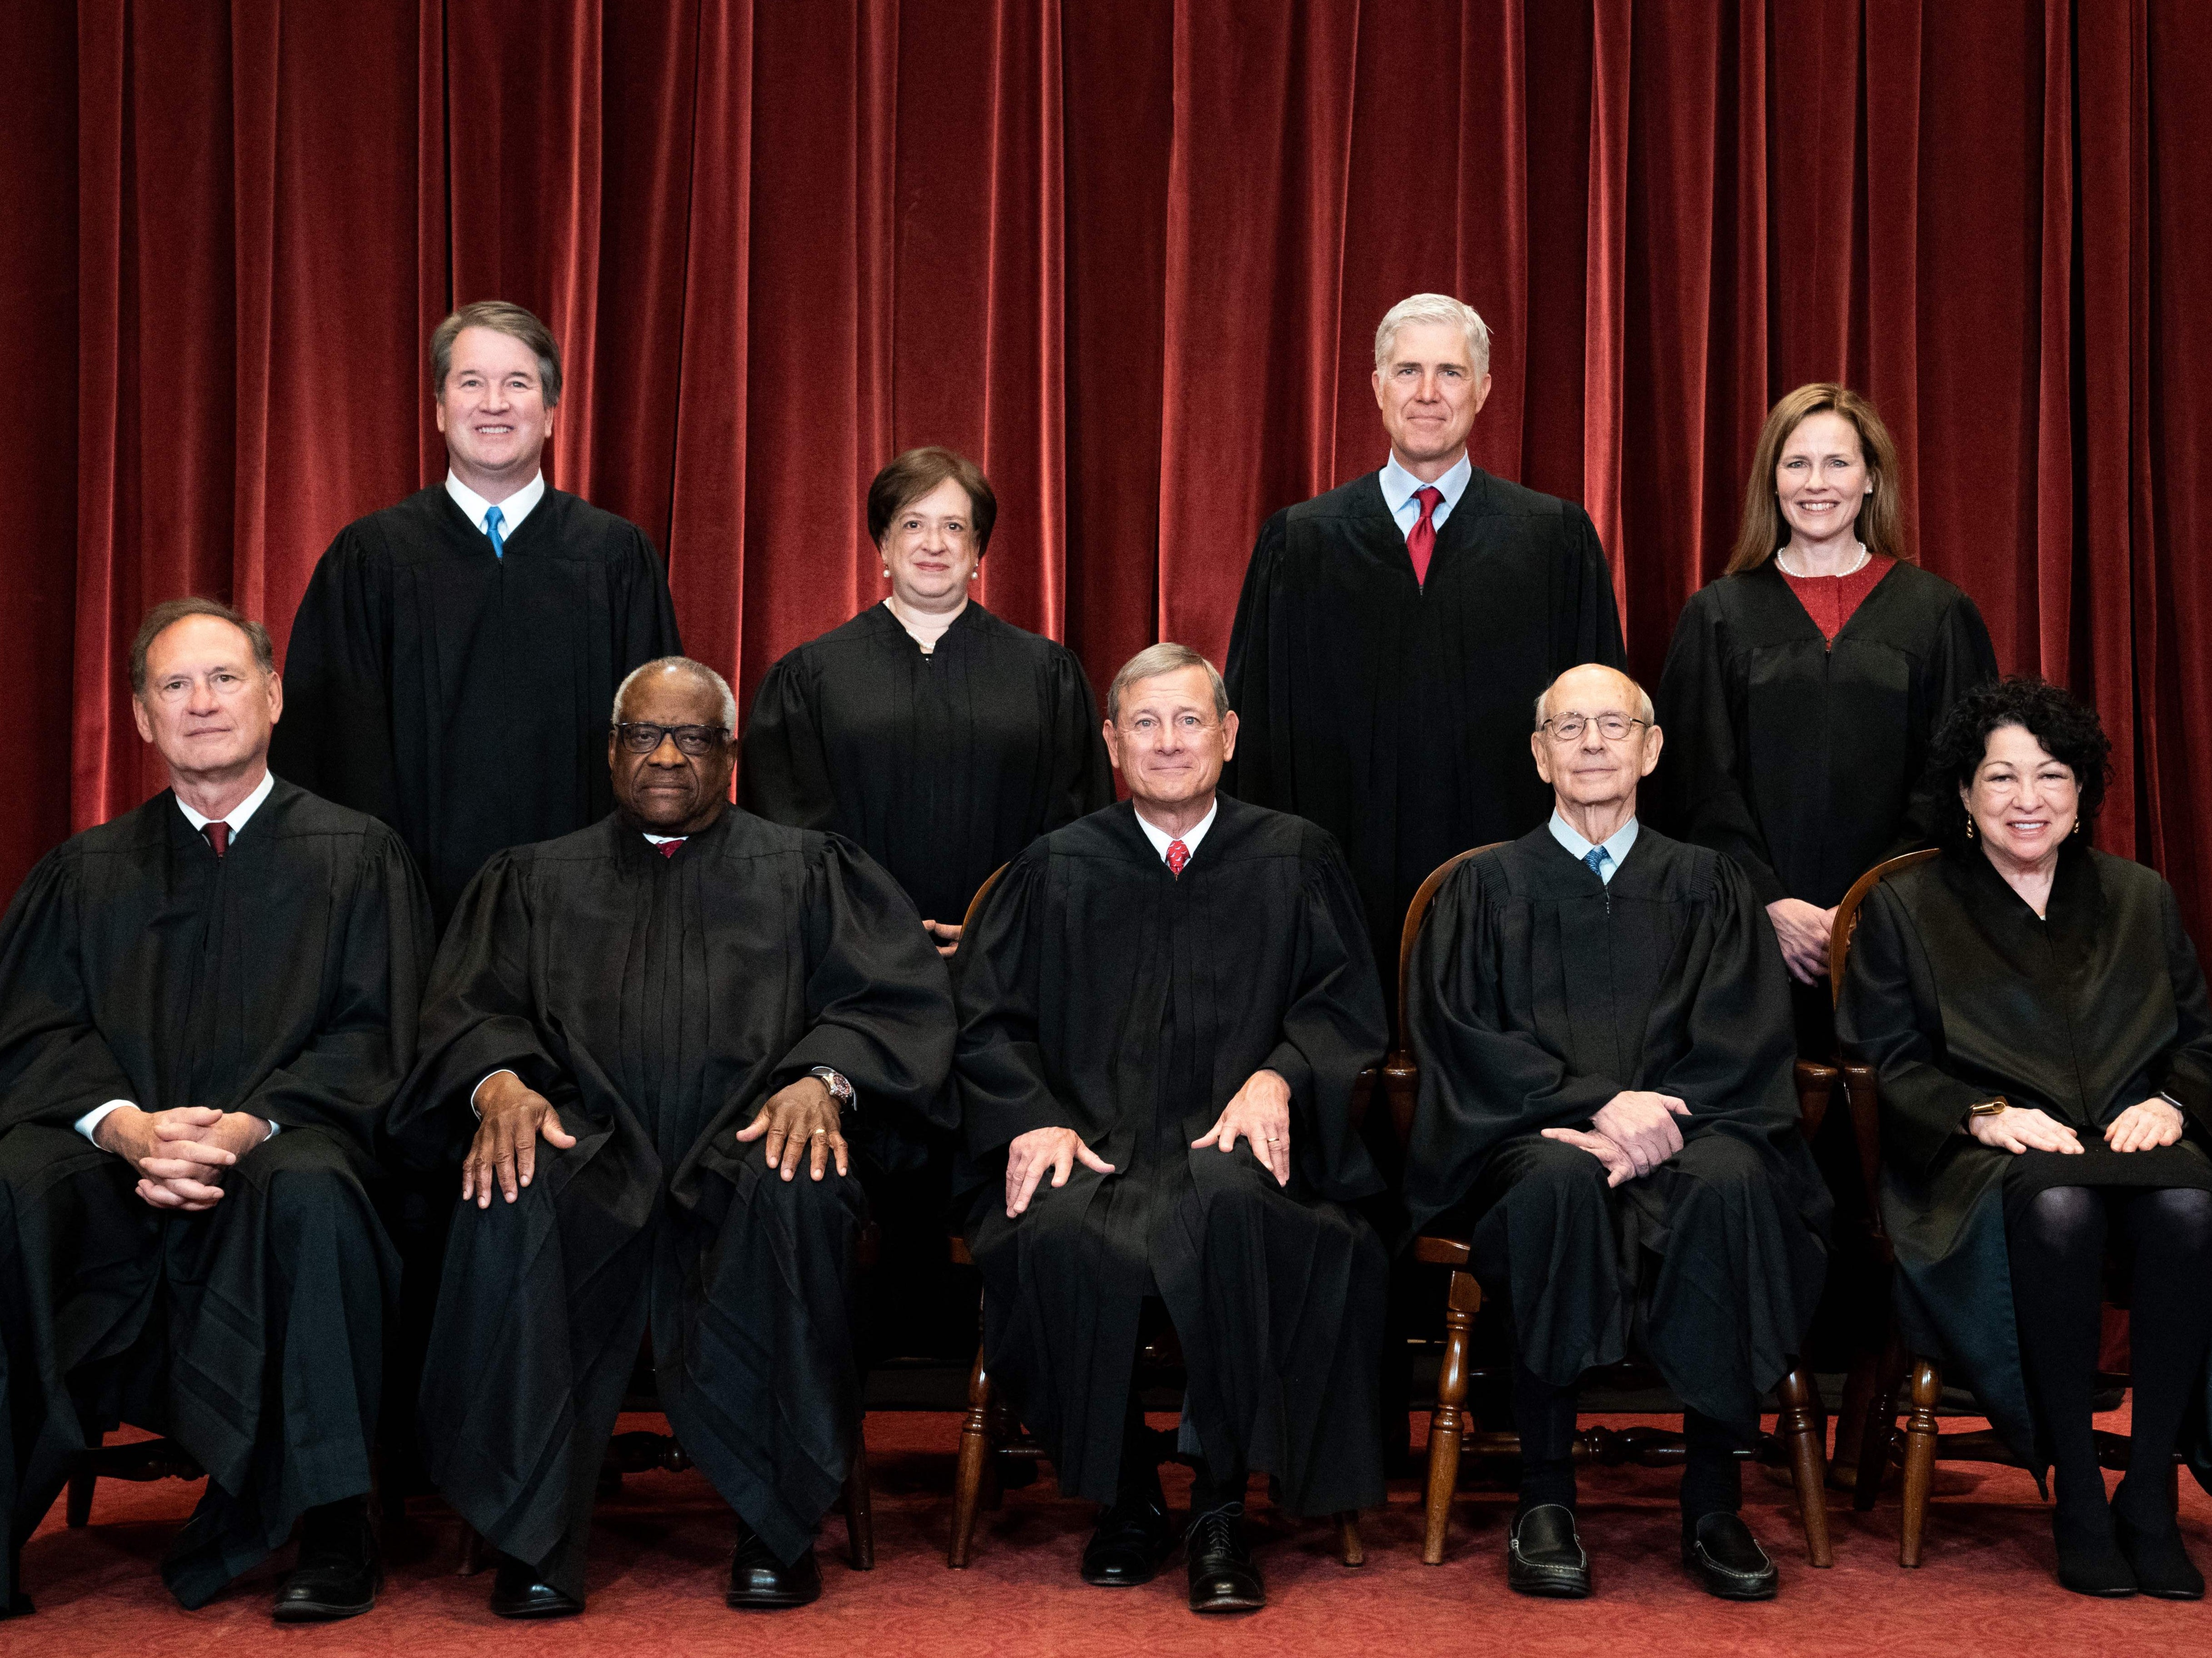 Seated from left: Associate Justice Samuel Alito, Associate Justice Clarence Thomas, Chief Justice John Roberts, Associate Justice Stephen Breyer and Associate Justice Sonia Sotomayor, standing from left: Associate Justice Brett Kavanaugh, Associate Justice Elena Kagan, Associate Justice Neil Gorsuch and Associate Justice Amy Coney Barrett pose during a group photo of the Justices at the Supreme Court in Washington, DC on 23 April 2021